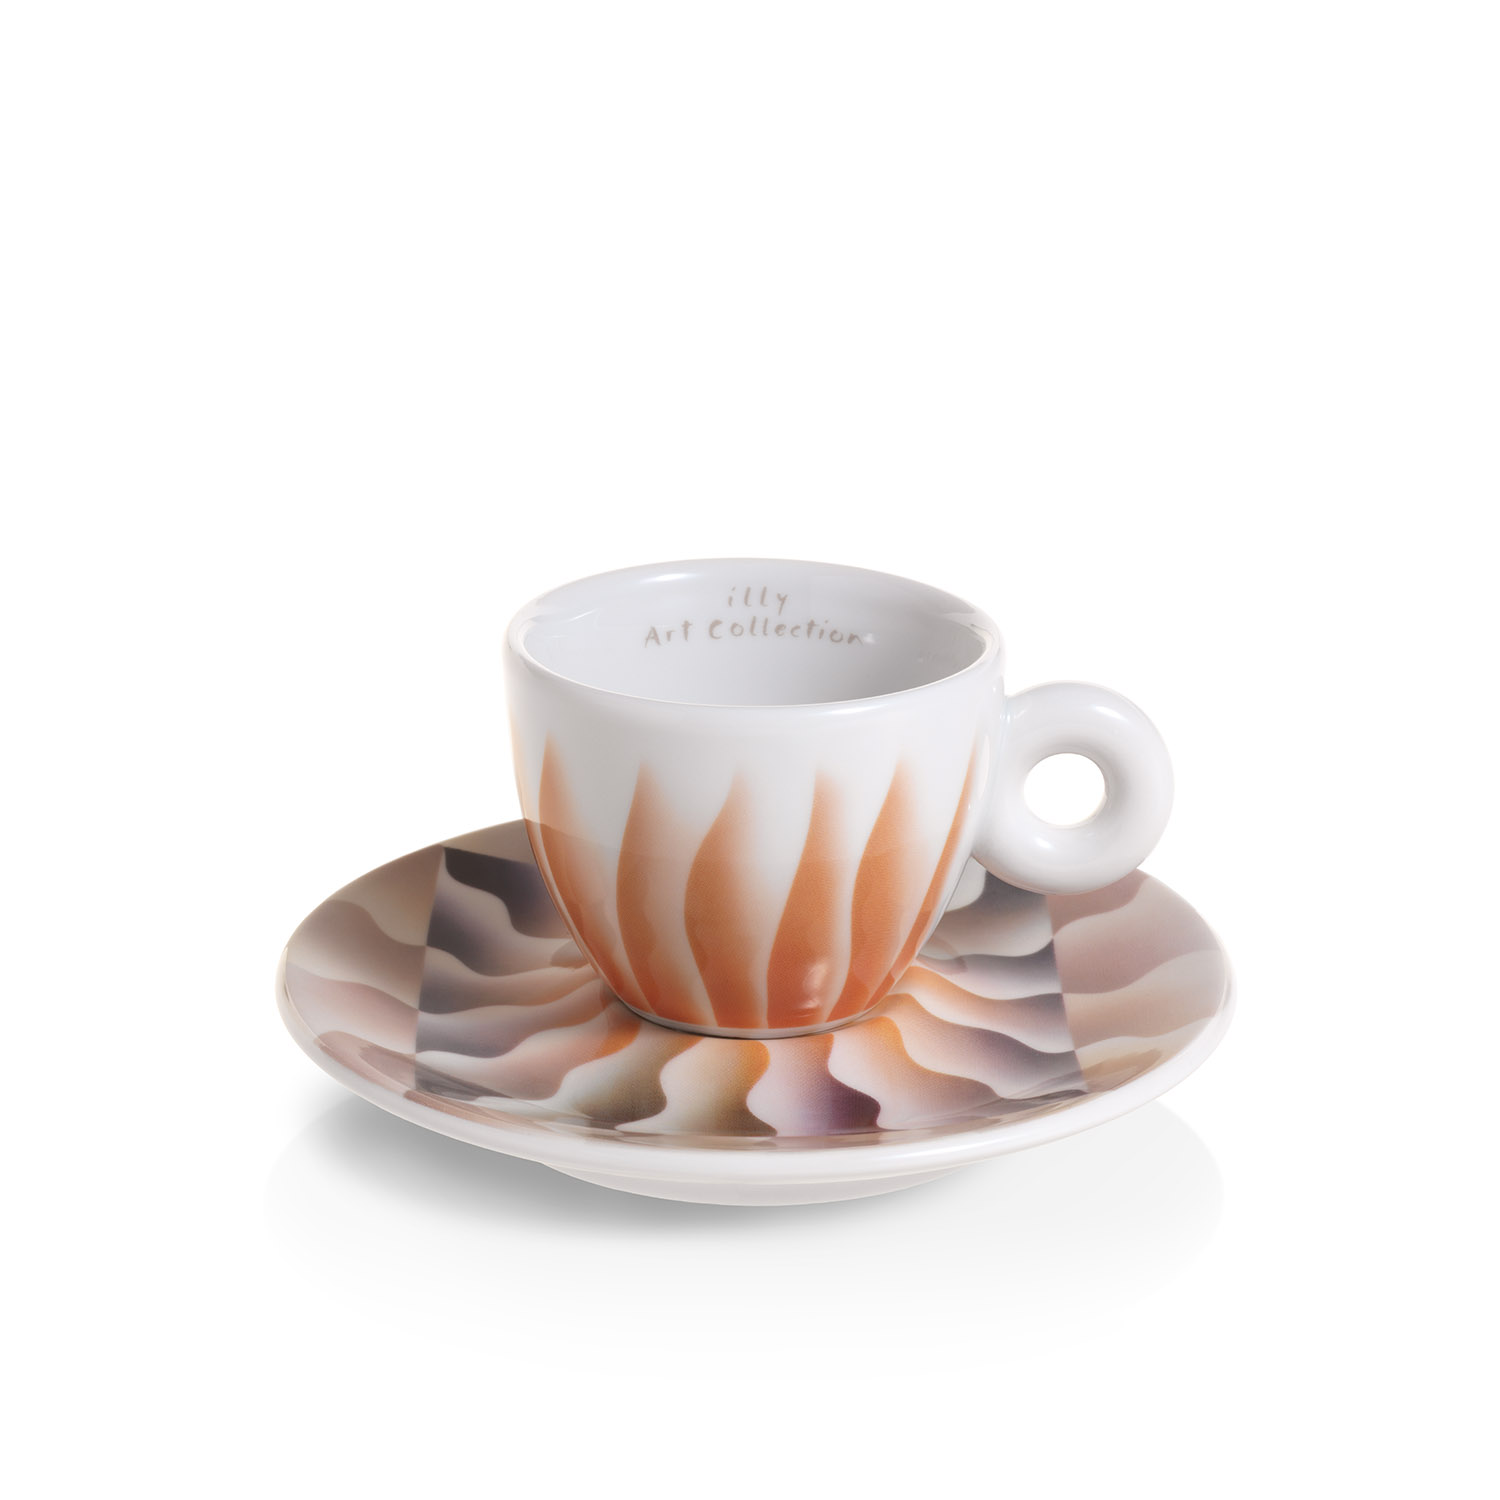 illy Art Collection JUDY CHICAGO Gift Set 4 Espresso Cups, Cups, 02-02-6092